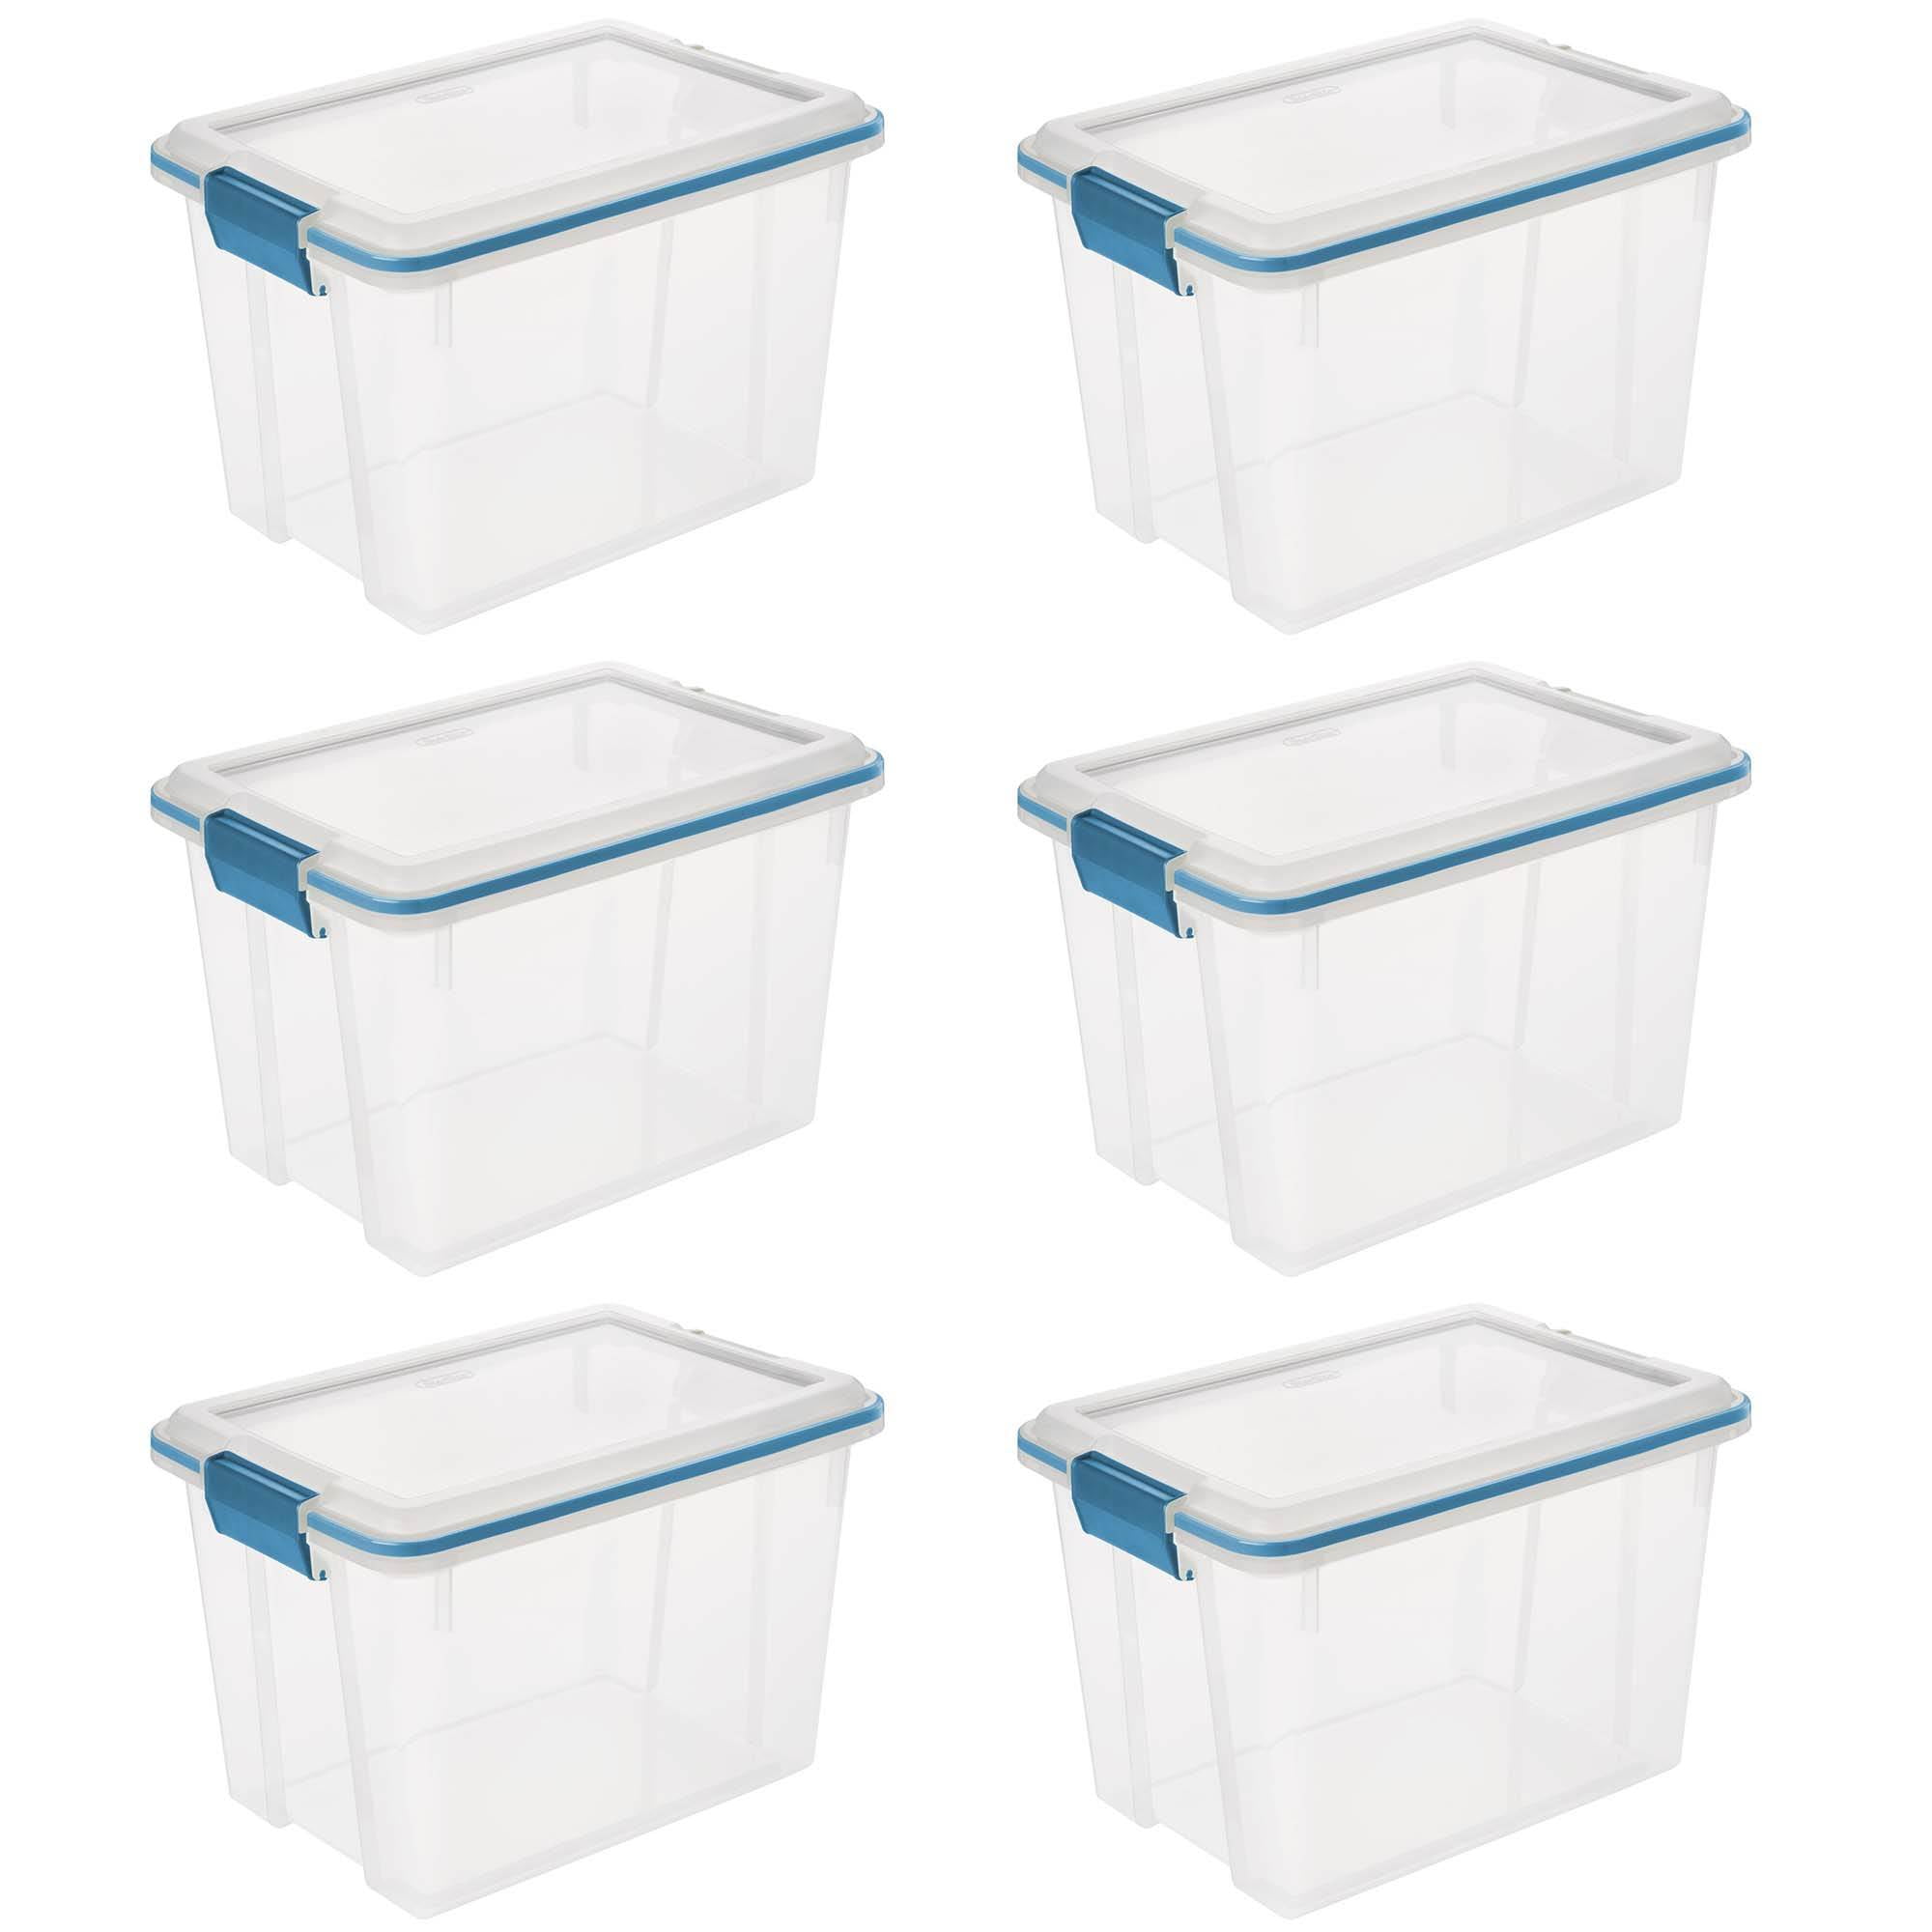 Sterilite 20 Qt. Clear Gasket Storage Box, Blue Latches with Clear Lid 